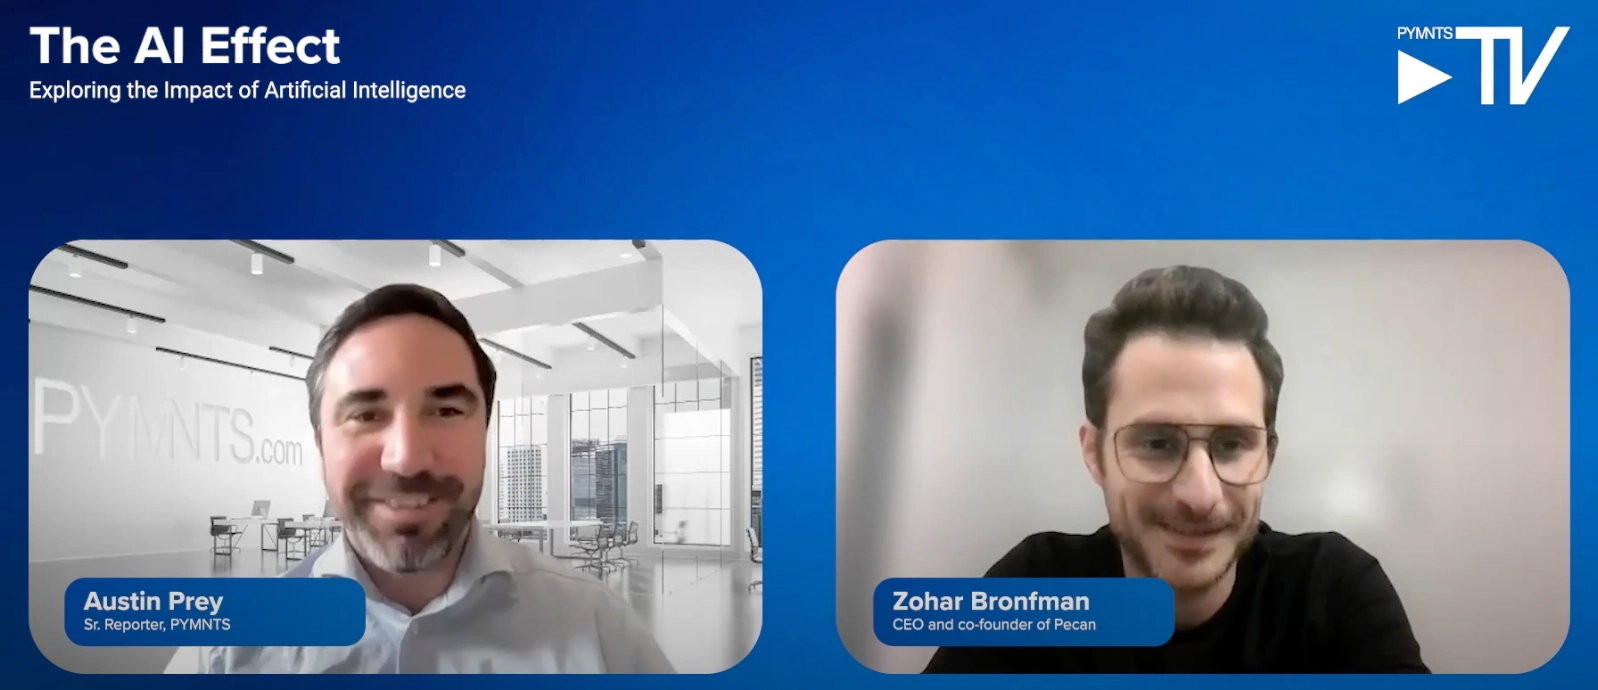 Austin Prey and Zohar Bronfman in screen capture from video interview 